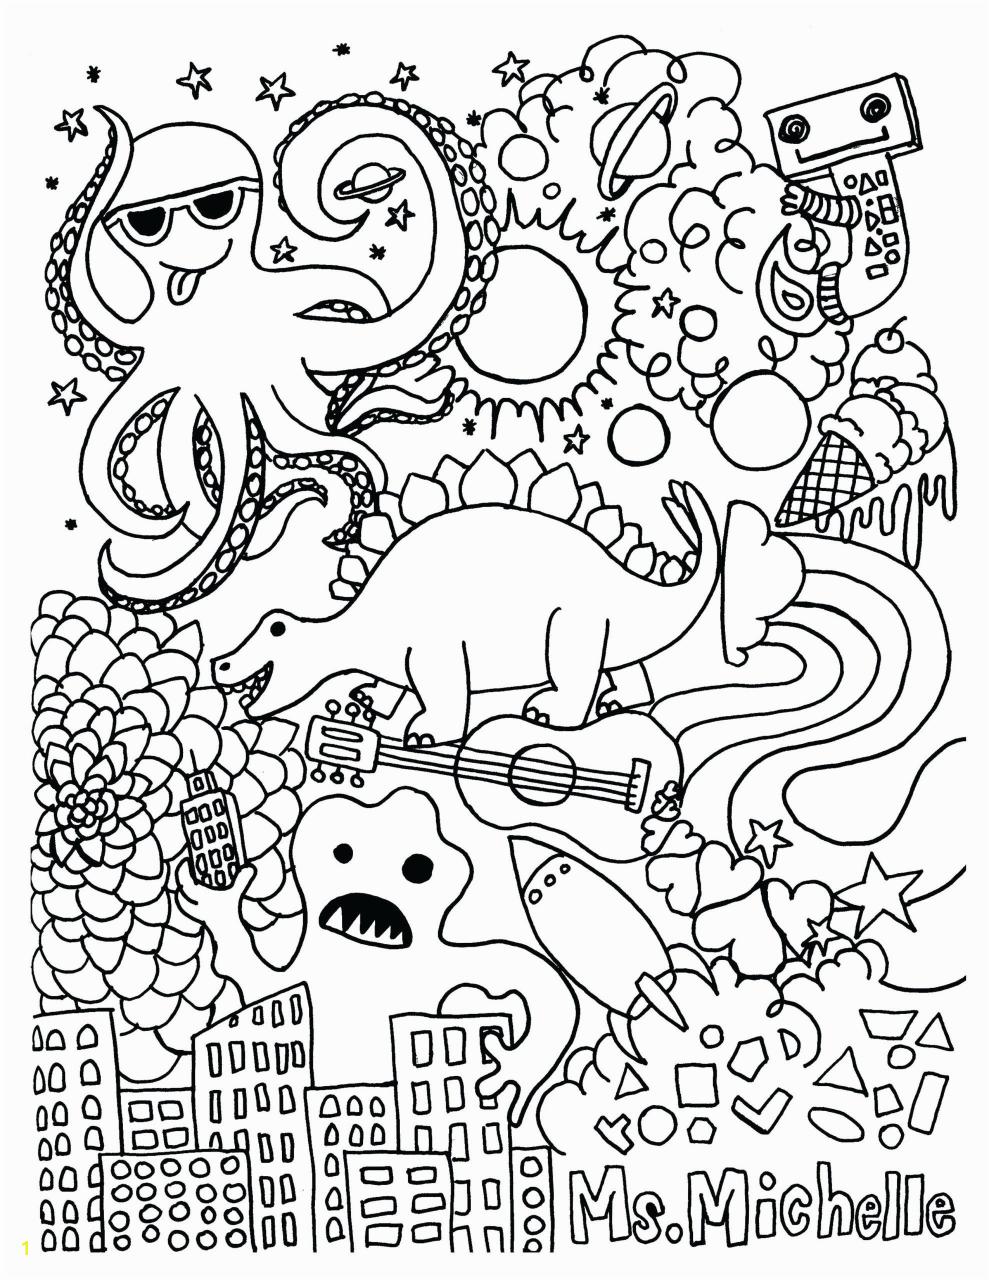 Coloring Pages for Fifth Graders